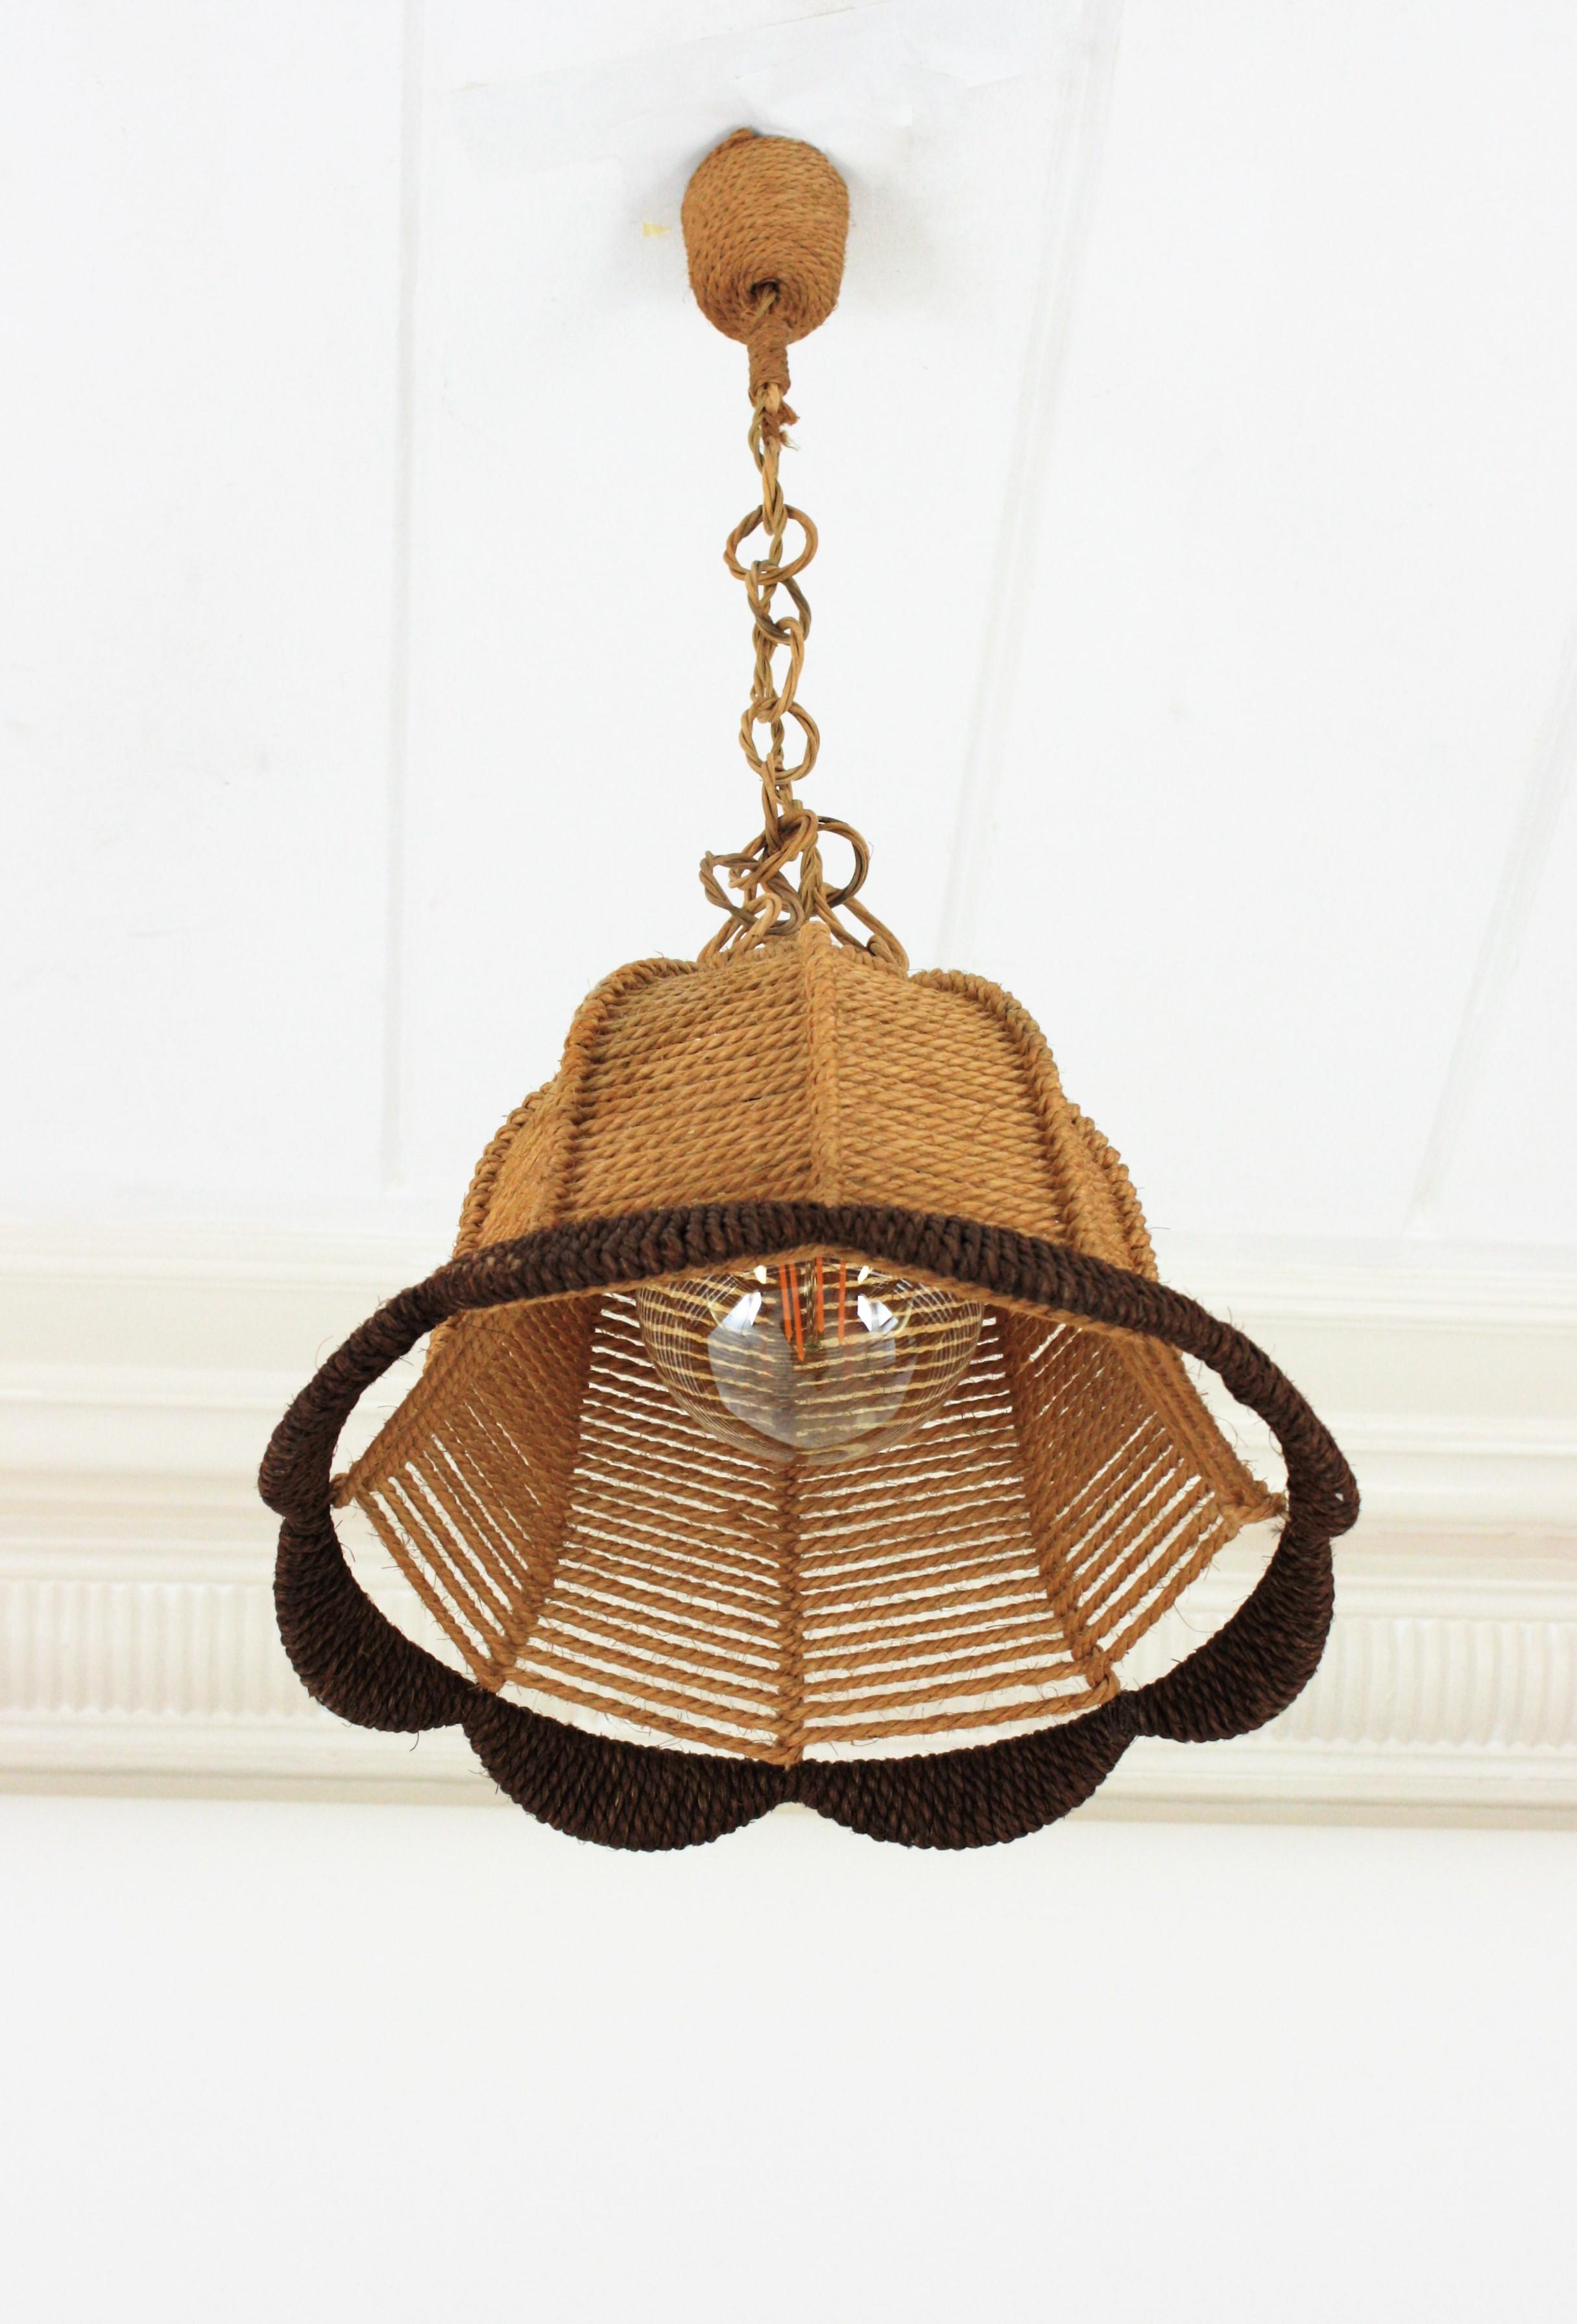 Rattan and Rope Bell Ceiling Pendant Light Hanging Lamp, Spain, 1960s 5